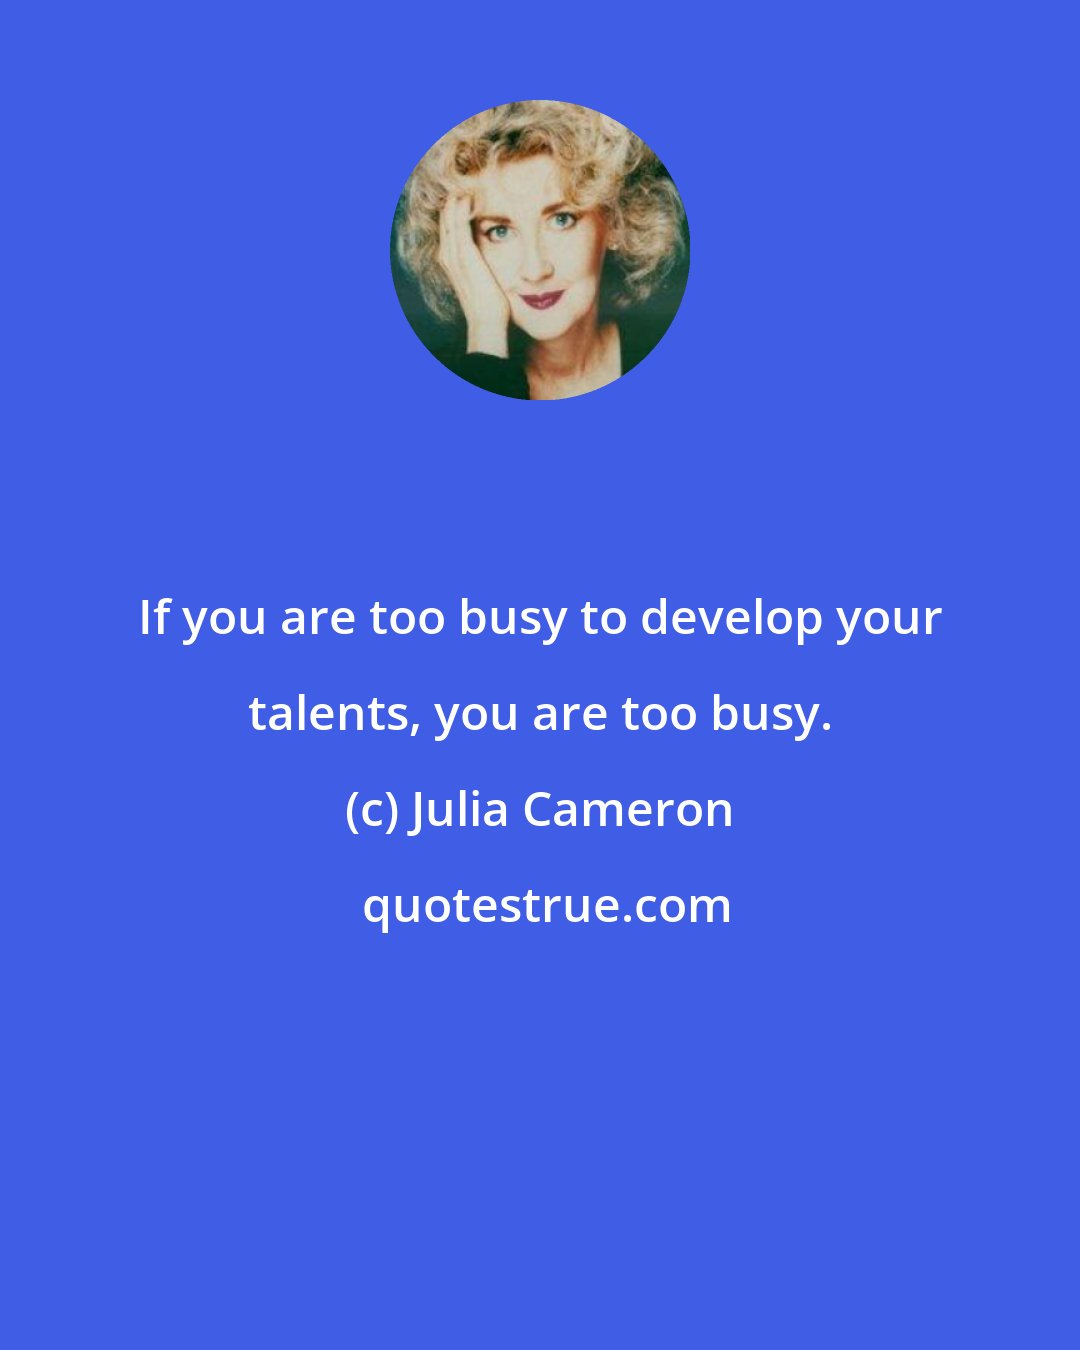 Julia Cameron: If you are too busy to develop your talents, you are too busy.